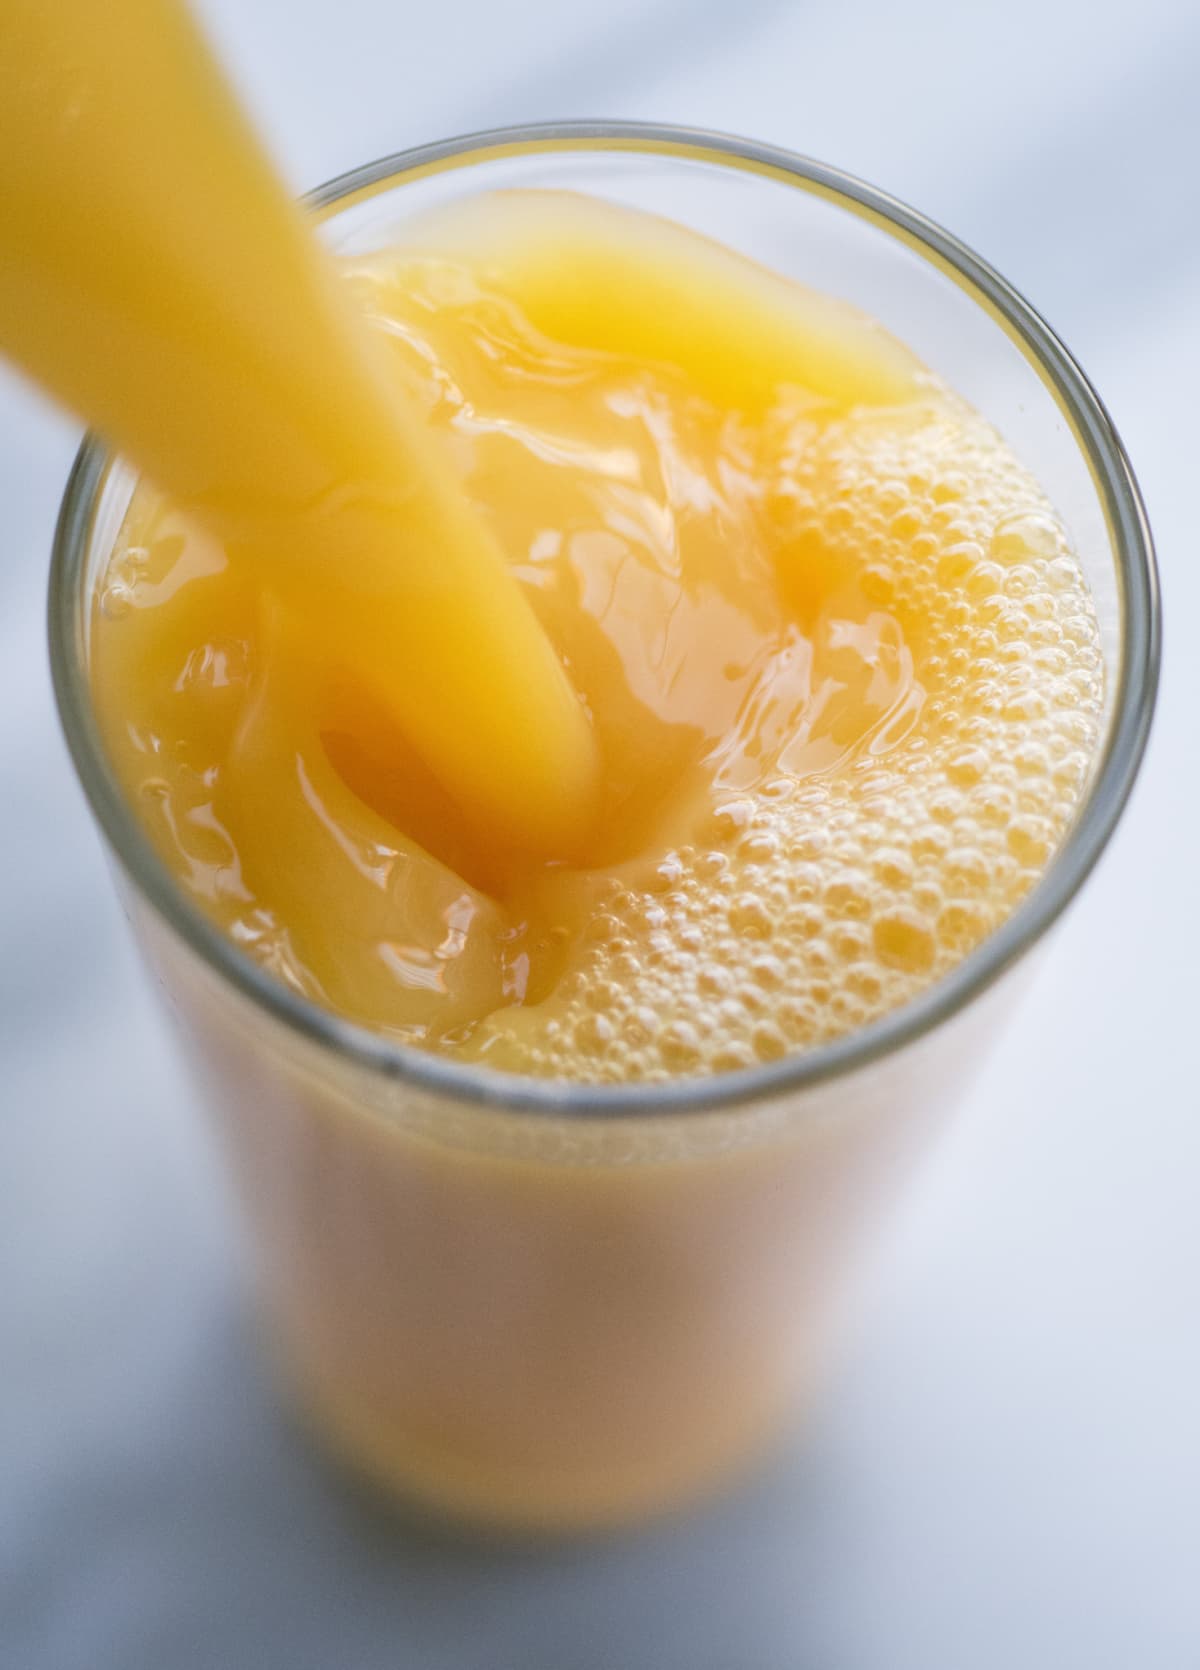 Orange juice being poured into a glass